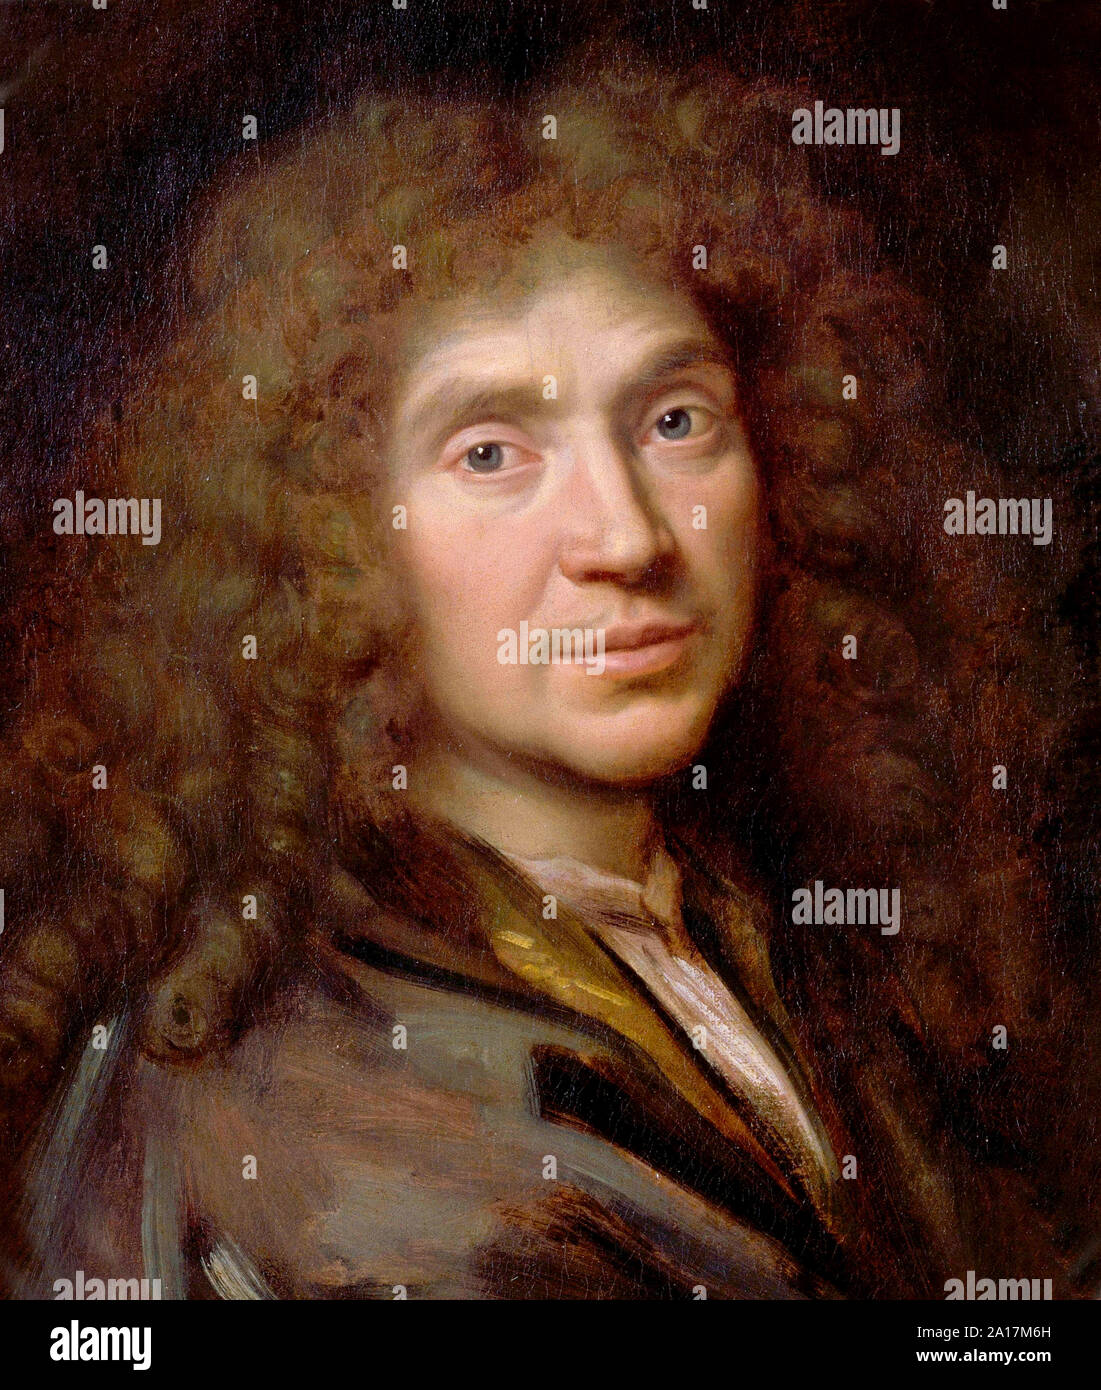 Molière, Jean-Baptiste Poquelin (1622 - 1673), known by his stage name Molière, French playwright, actor and poet, widely regarded as one of the greatest writers in the French language and universal literature. Molière portrait by Pierre Mignard Stock Photo